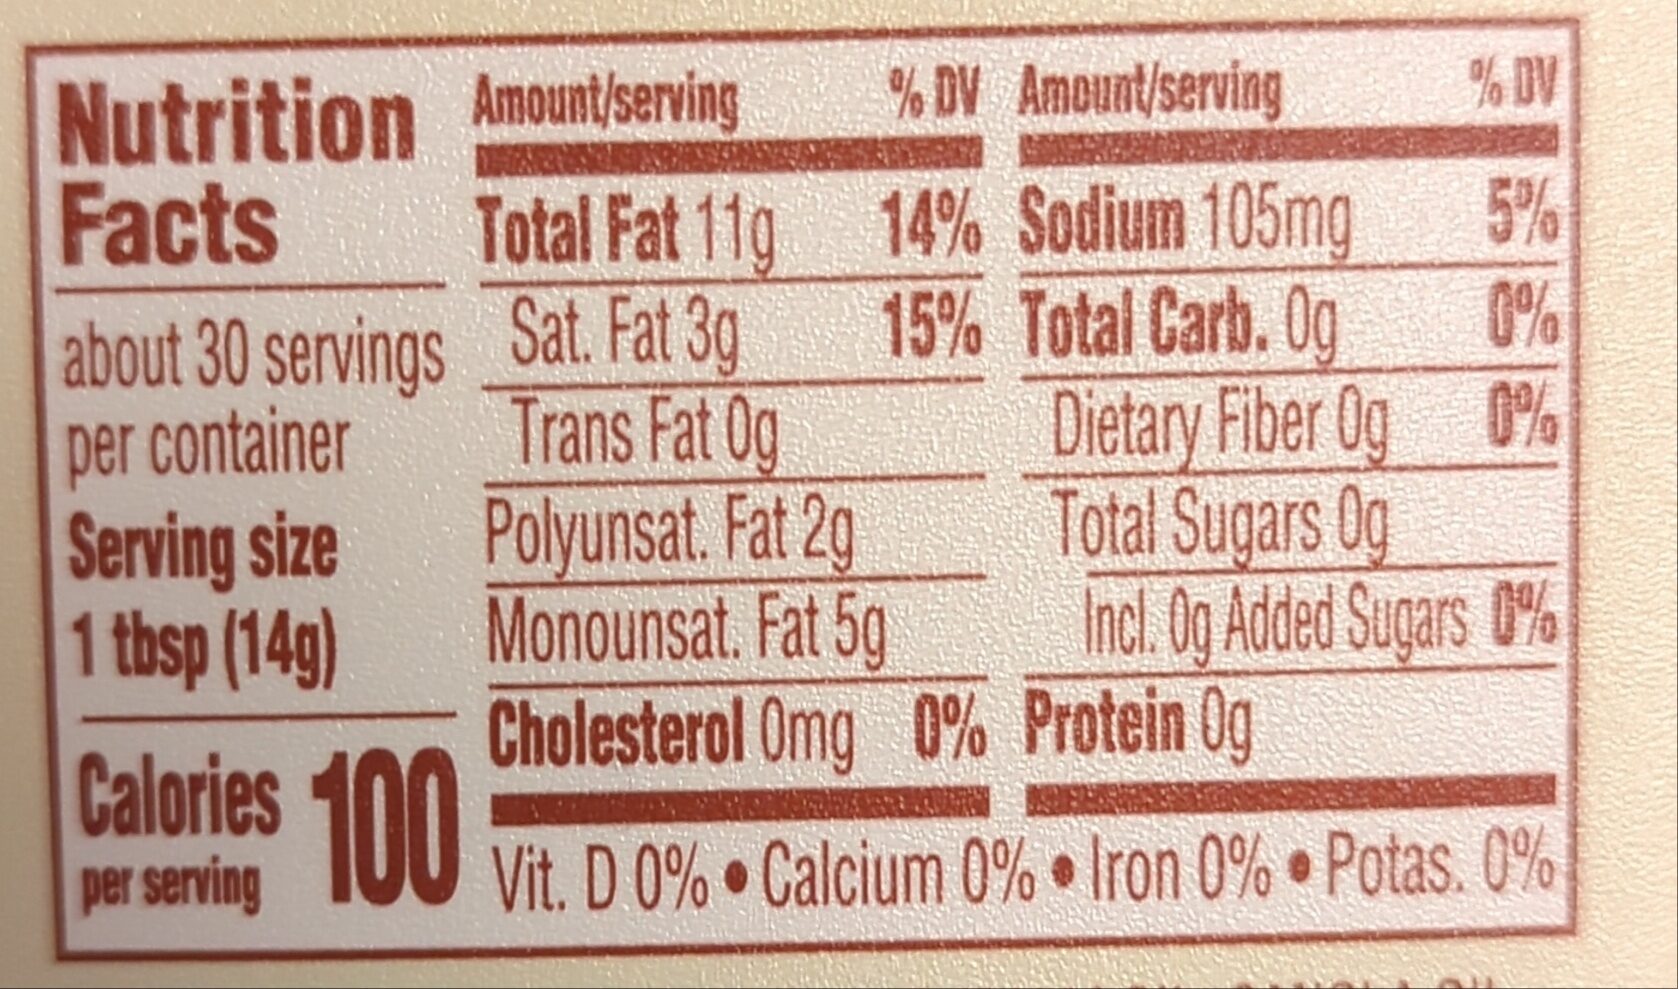 Original natural buttery spread - Nutrition facts